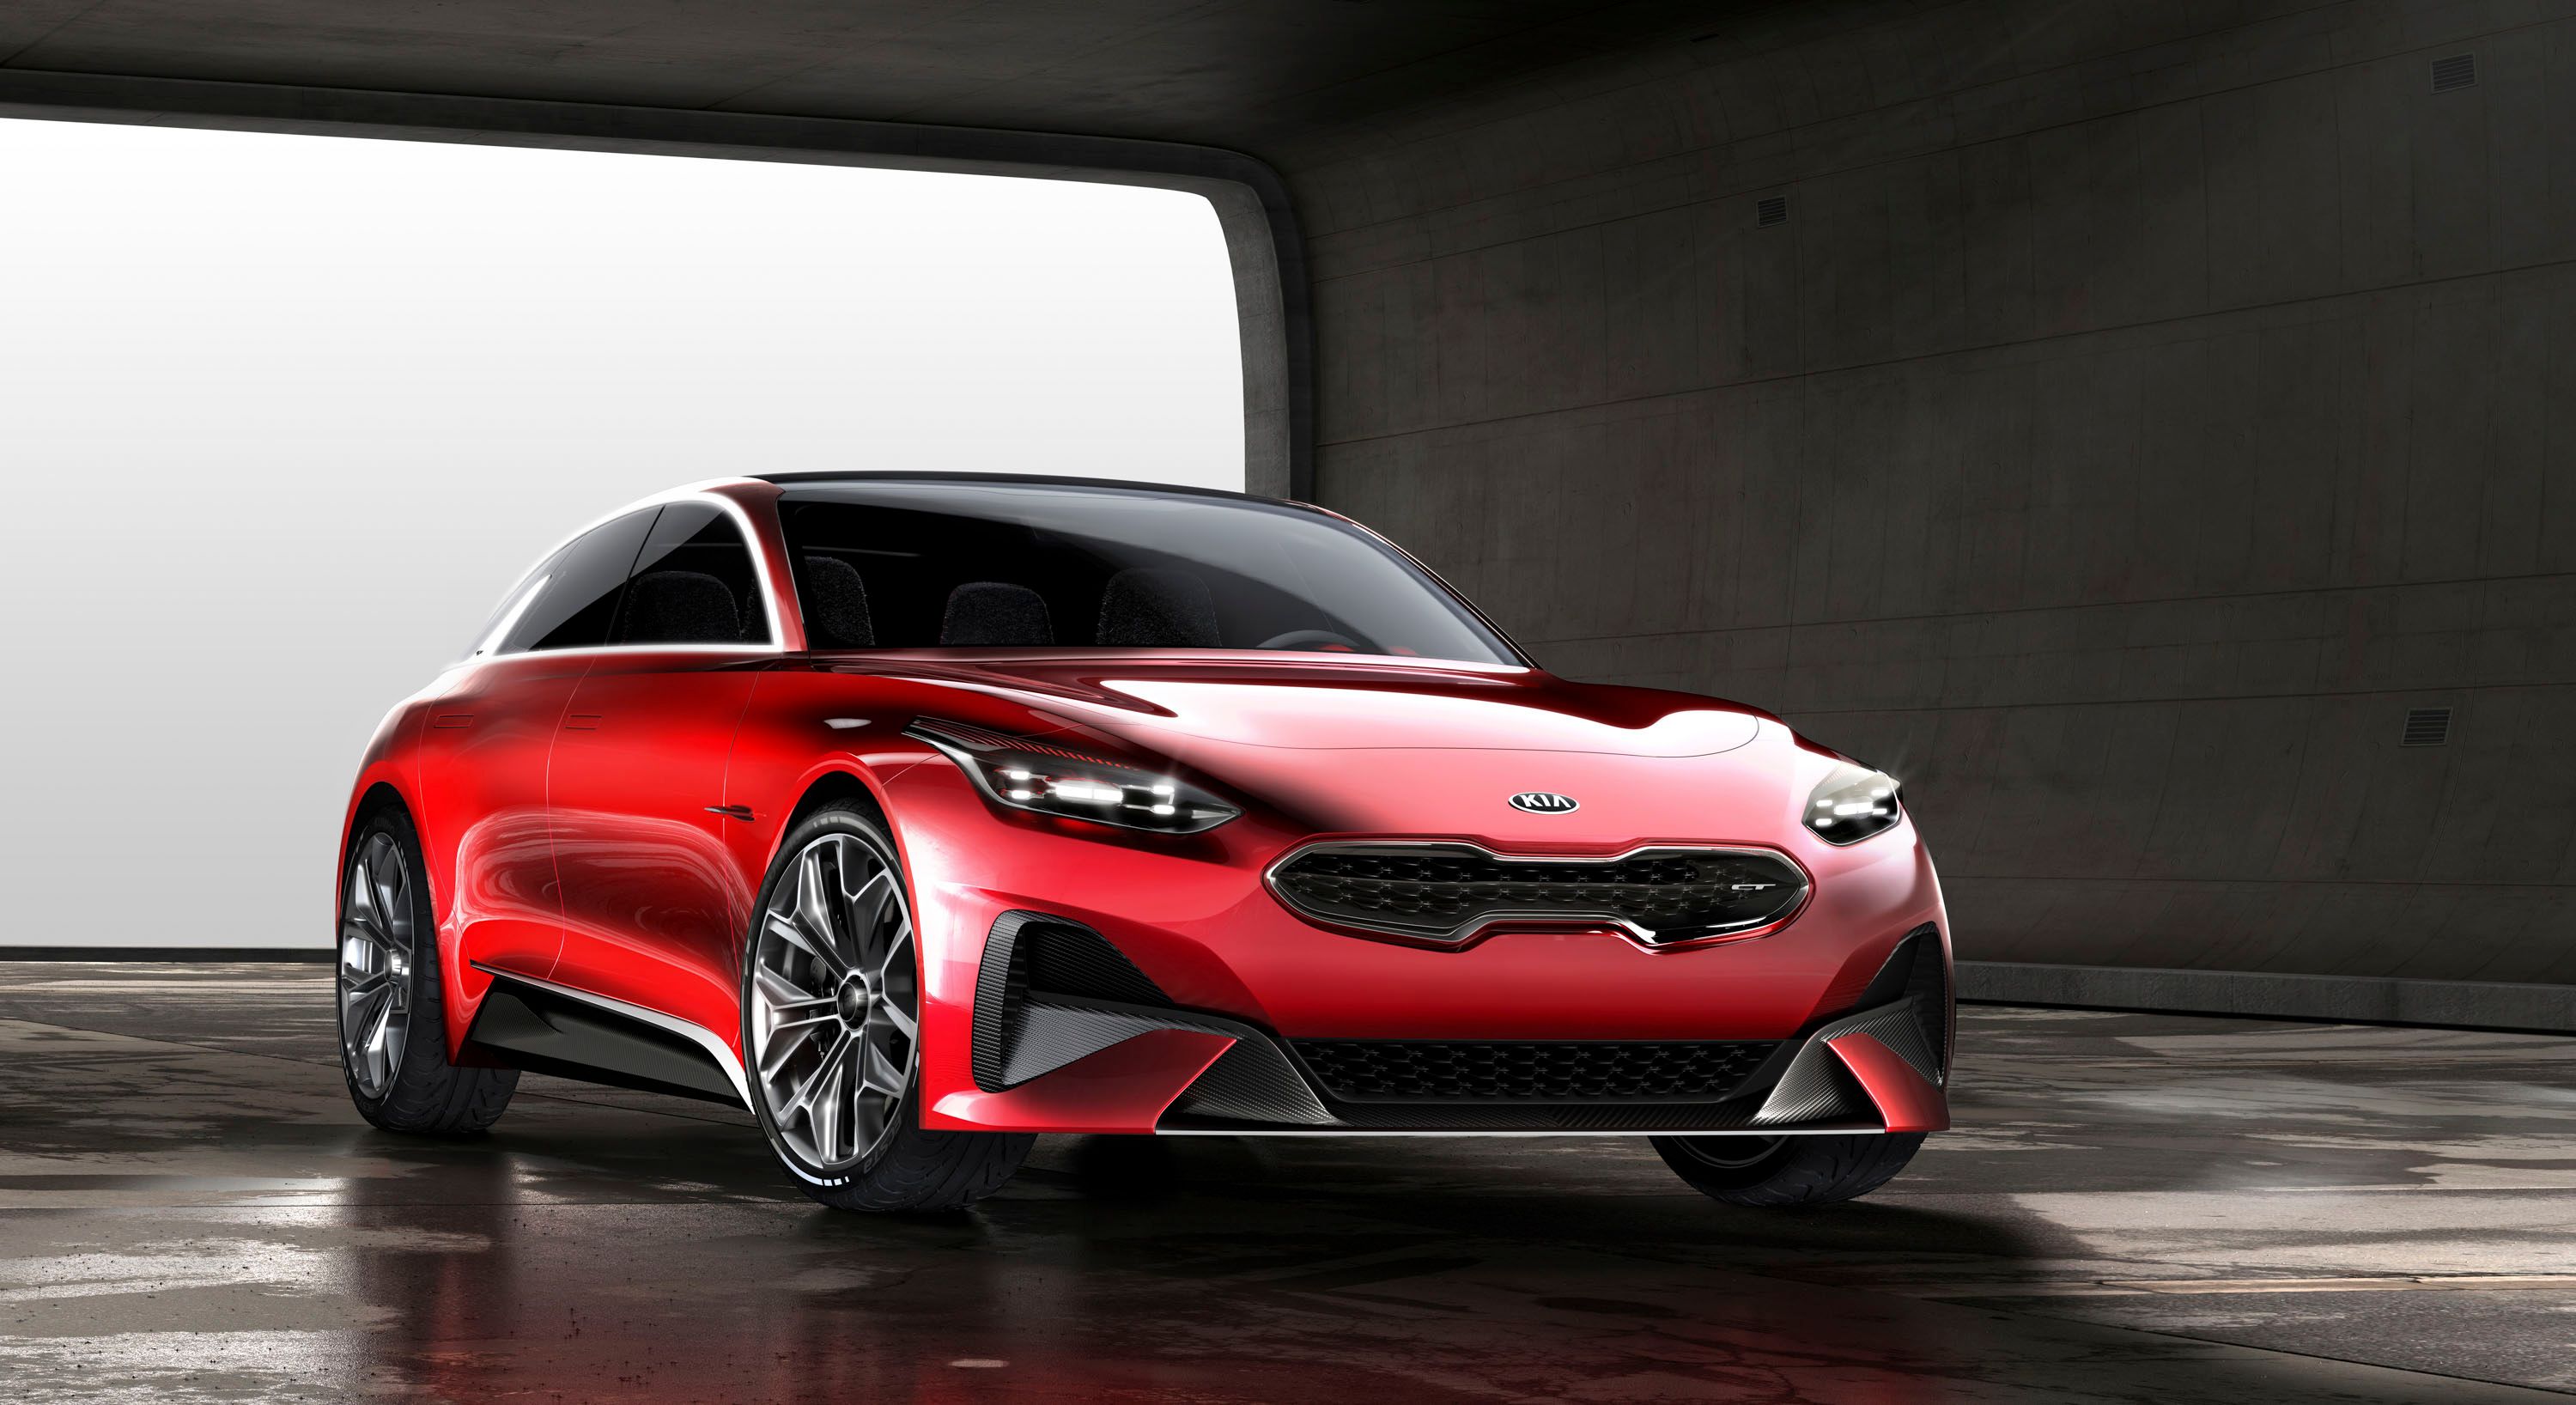 2018 The Kia Proceed Shooting Brake Could Debut at the Paris Motor Show